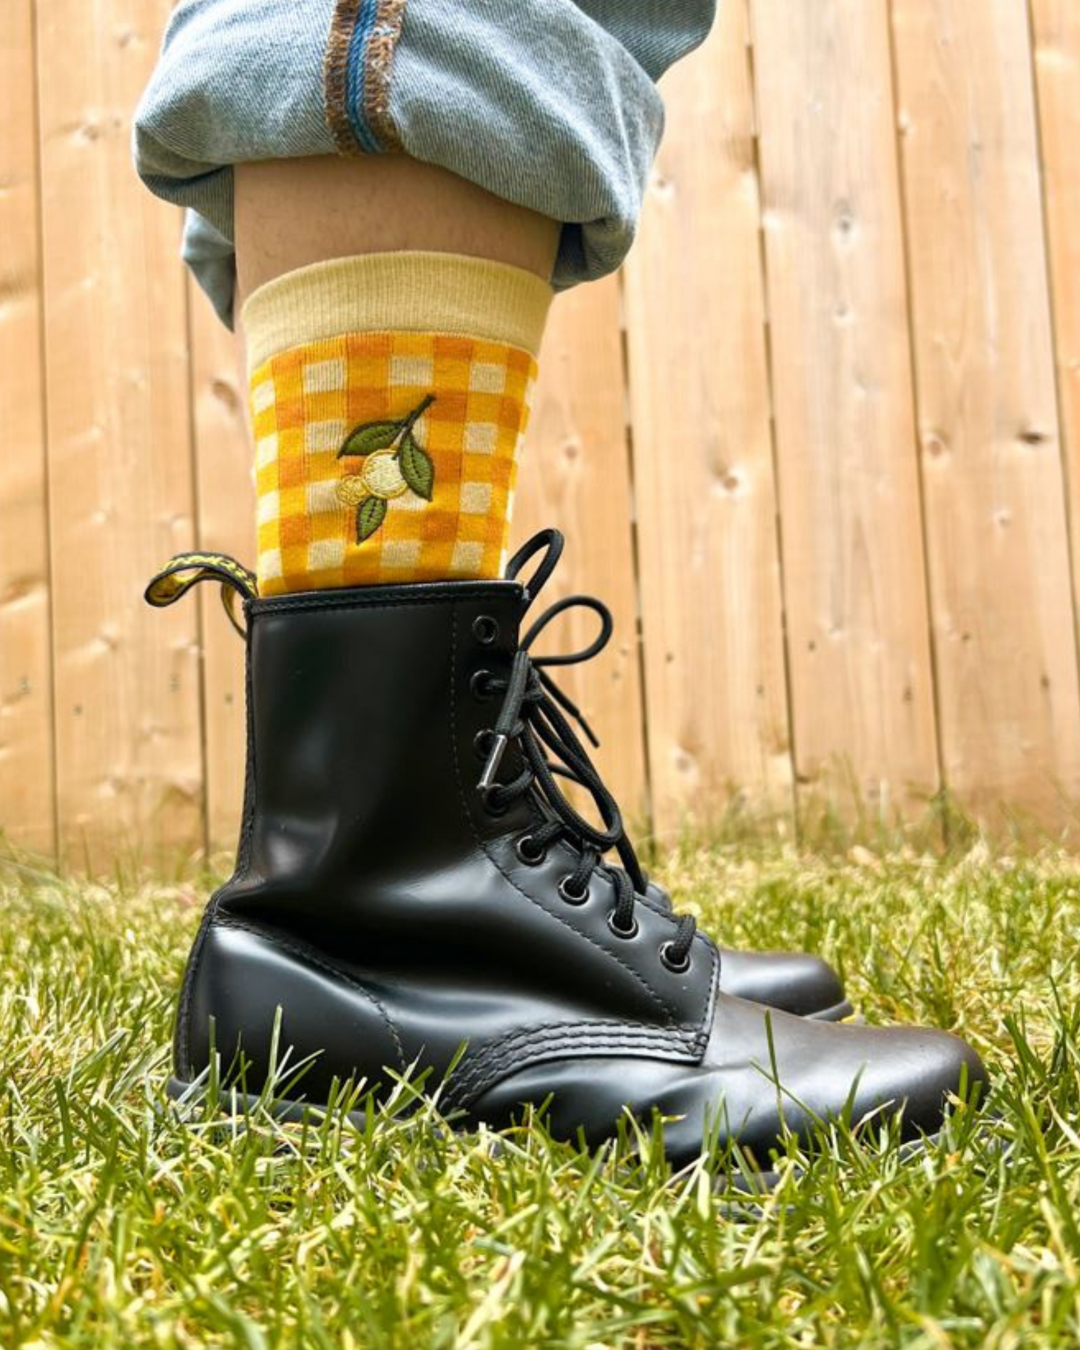 Clementine Gingham Socks | Embroidered